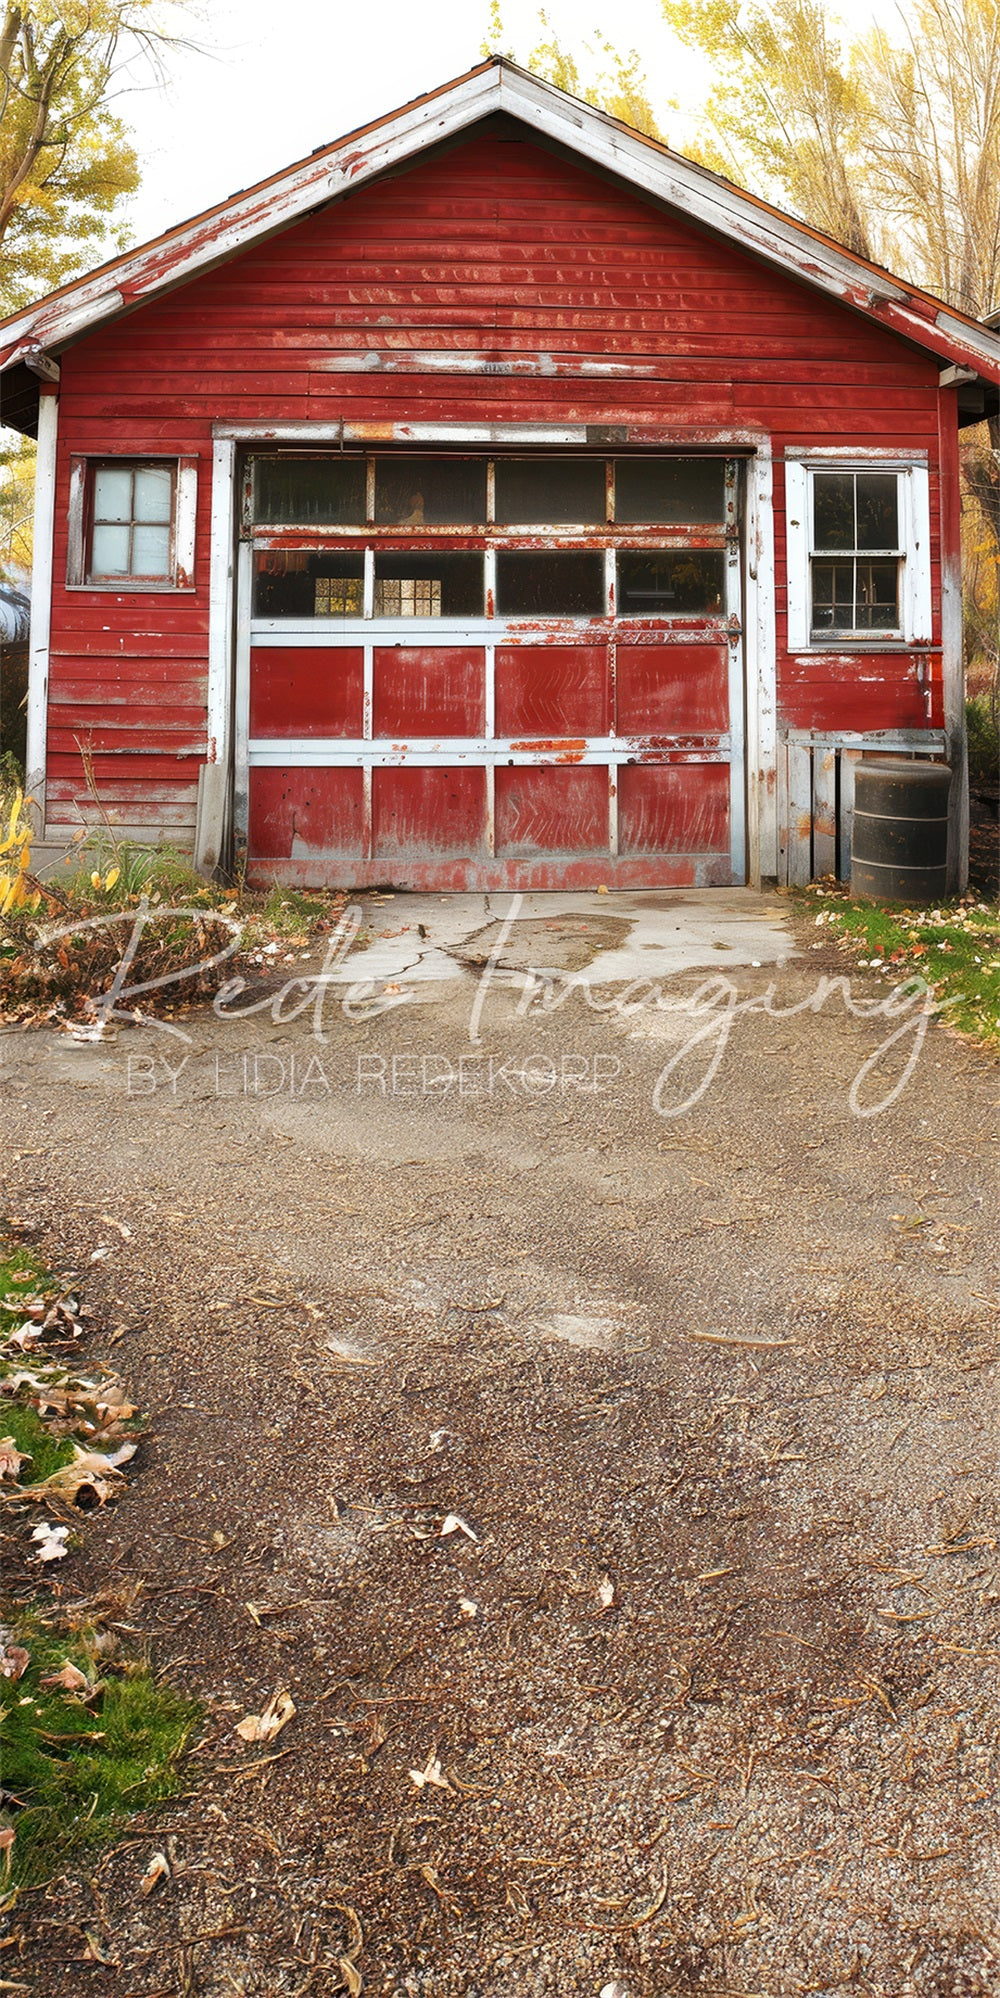 TEST Kate Autumn Outdoor Forest Red Old Garage Backdrop Designed by Lidia Redekopp